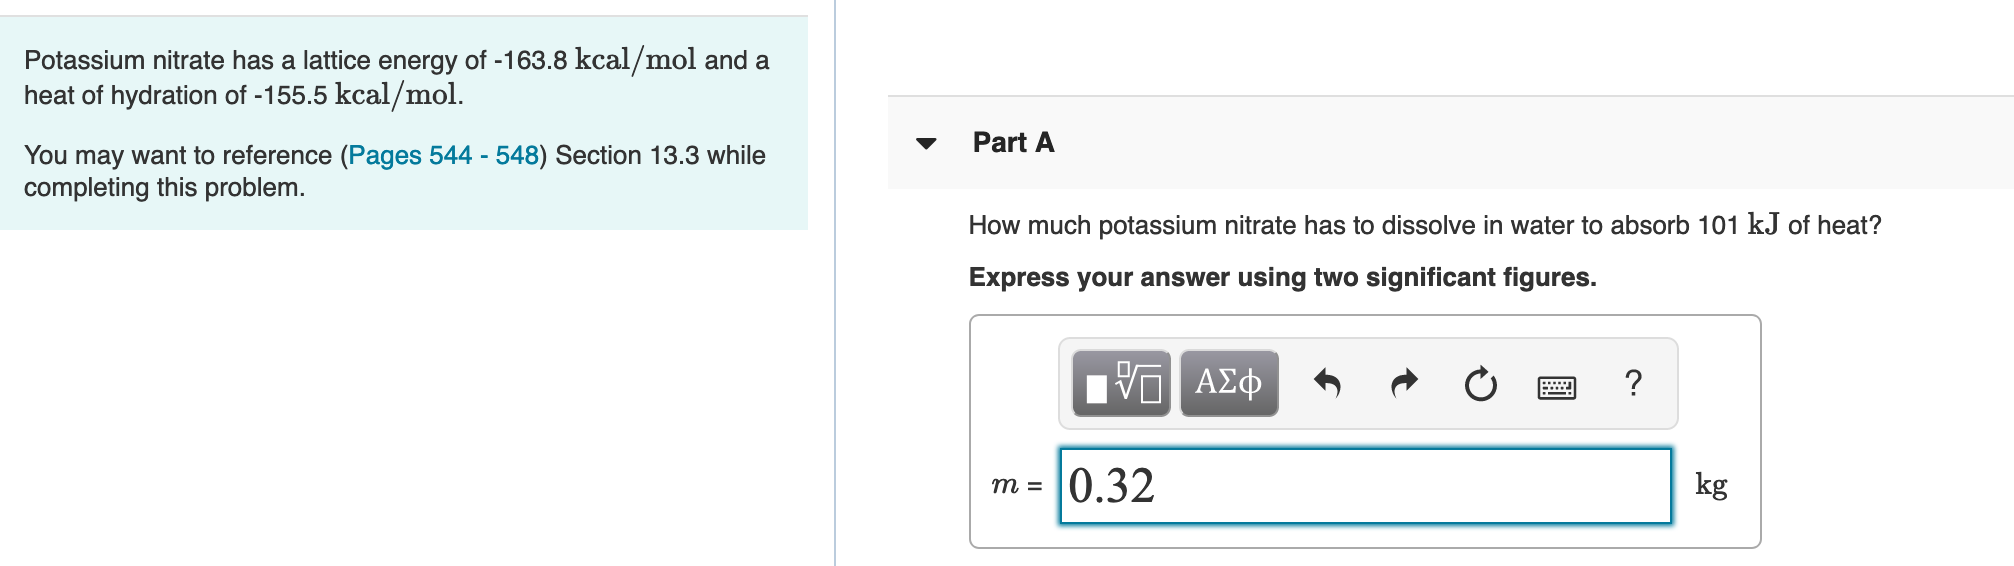 Potassium nitrate has a lattice energy of -163.8 kcal/mol and a
heat of hydration of -155.5 kcal/mol.
Part A
You may want to reference (Pages 544 - 548) Section 13.3 while
completing this problem.
How much potassium nitrate has to dissolve in water to absorb 101 kJ of heat?
Express your answer using two significant figures.
0.32
kg
